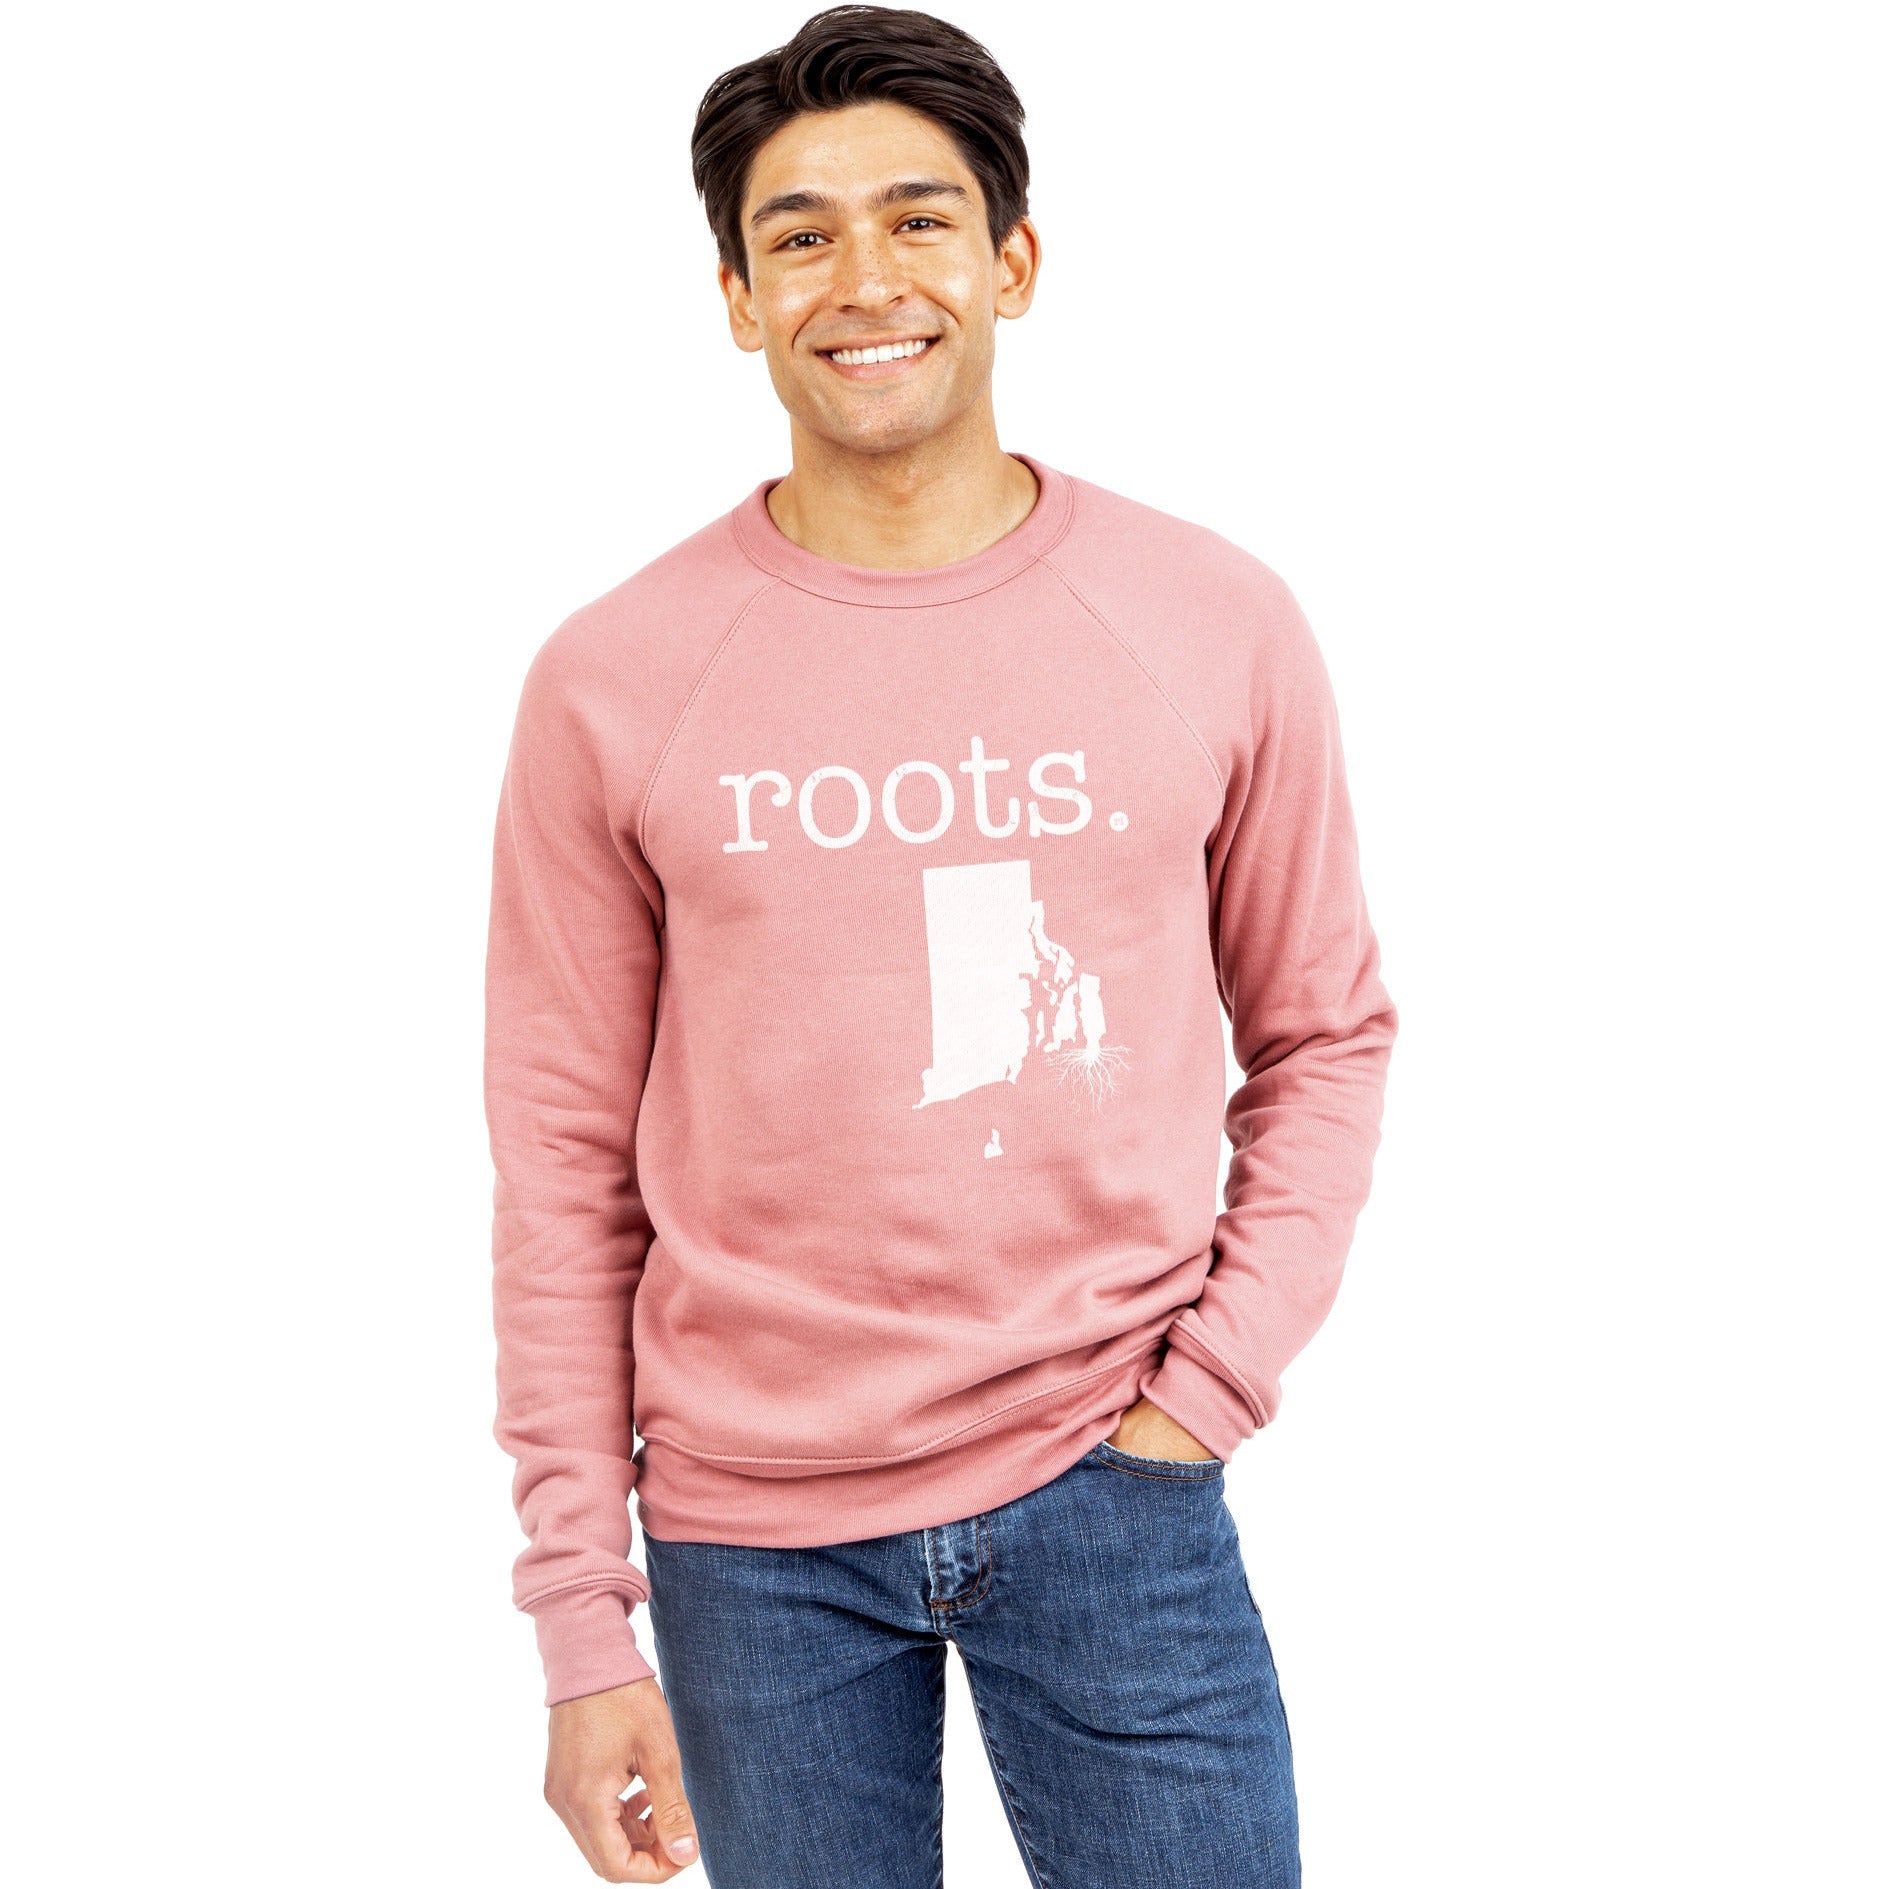 Roots State Rhode Island - Stories You Can Wear